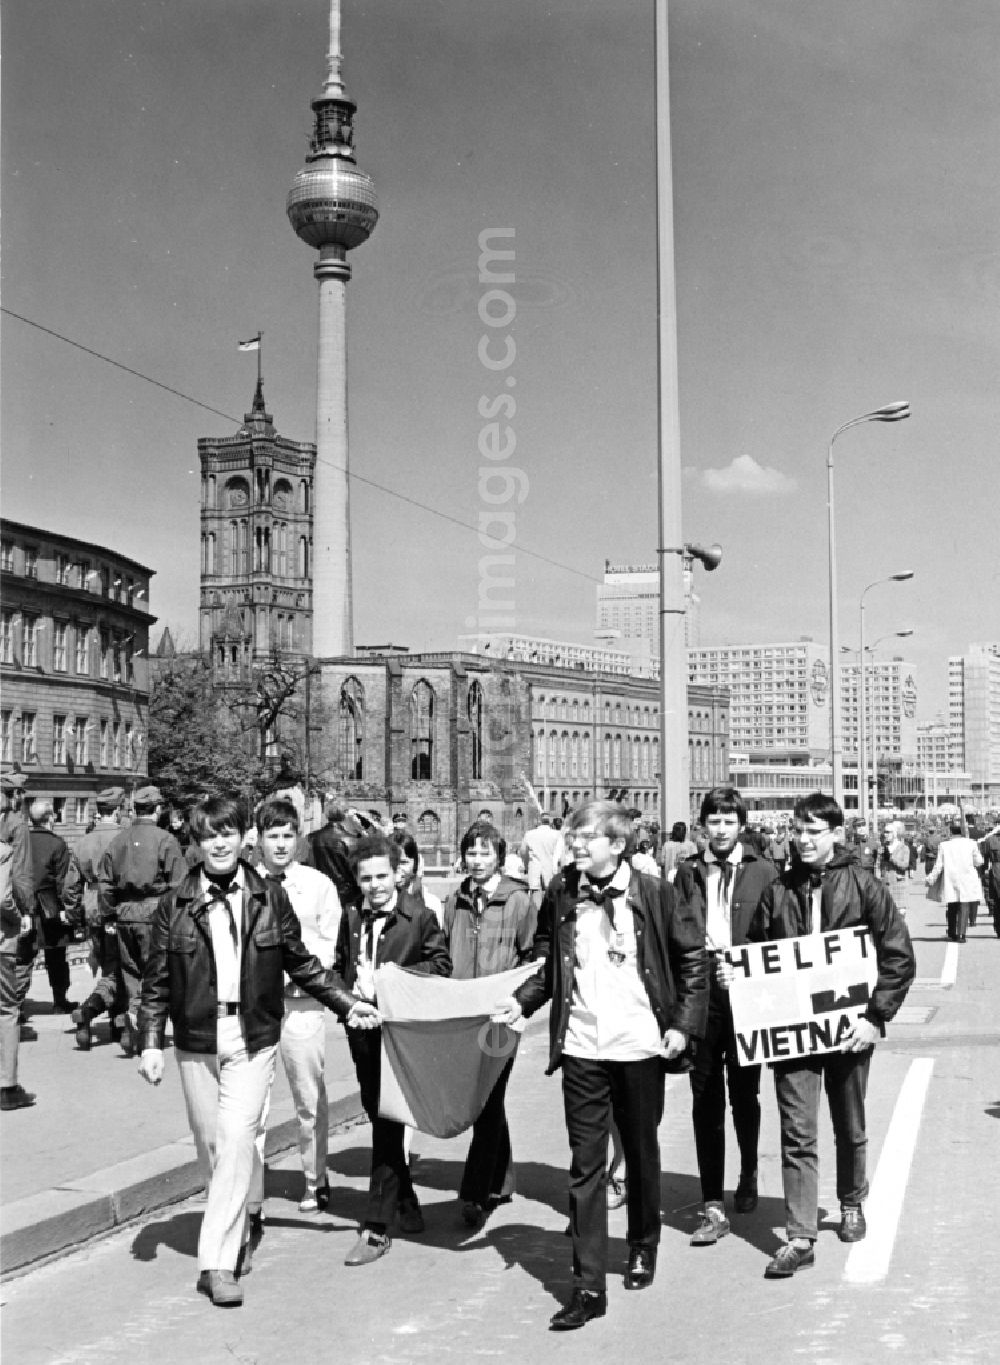 Berlin: Demonstration and street action against the Vietnam war on Grunerstrasse in the district Mitte in Berlin, the former capital of the GDR, German Democratic Republic